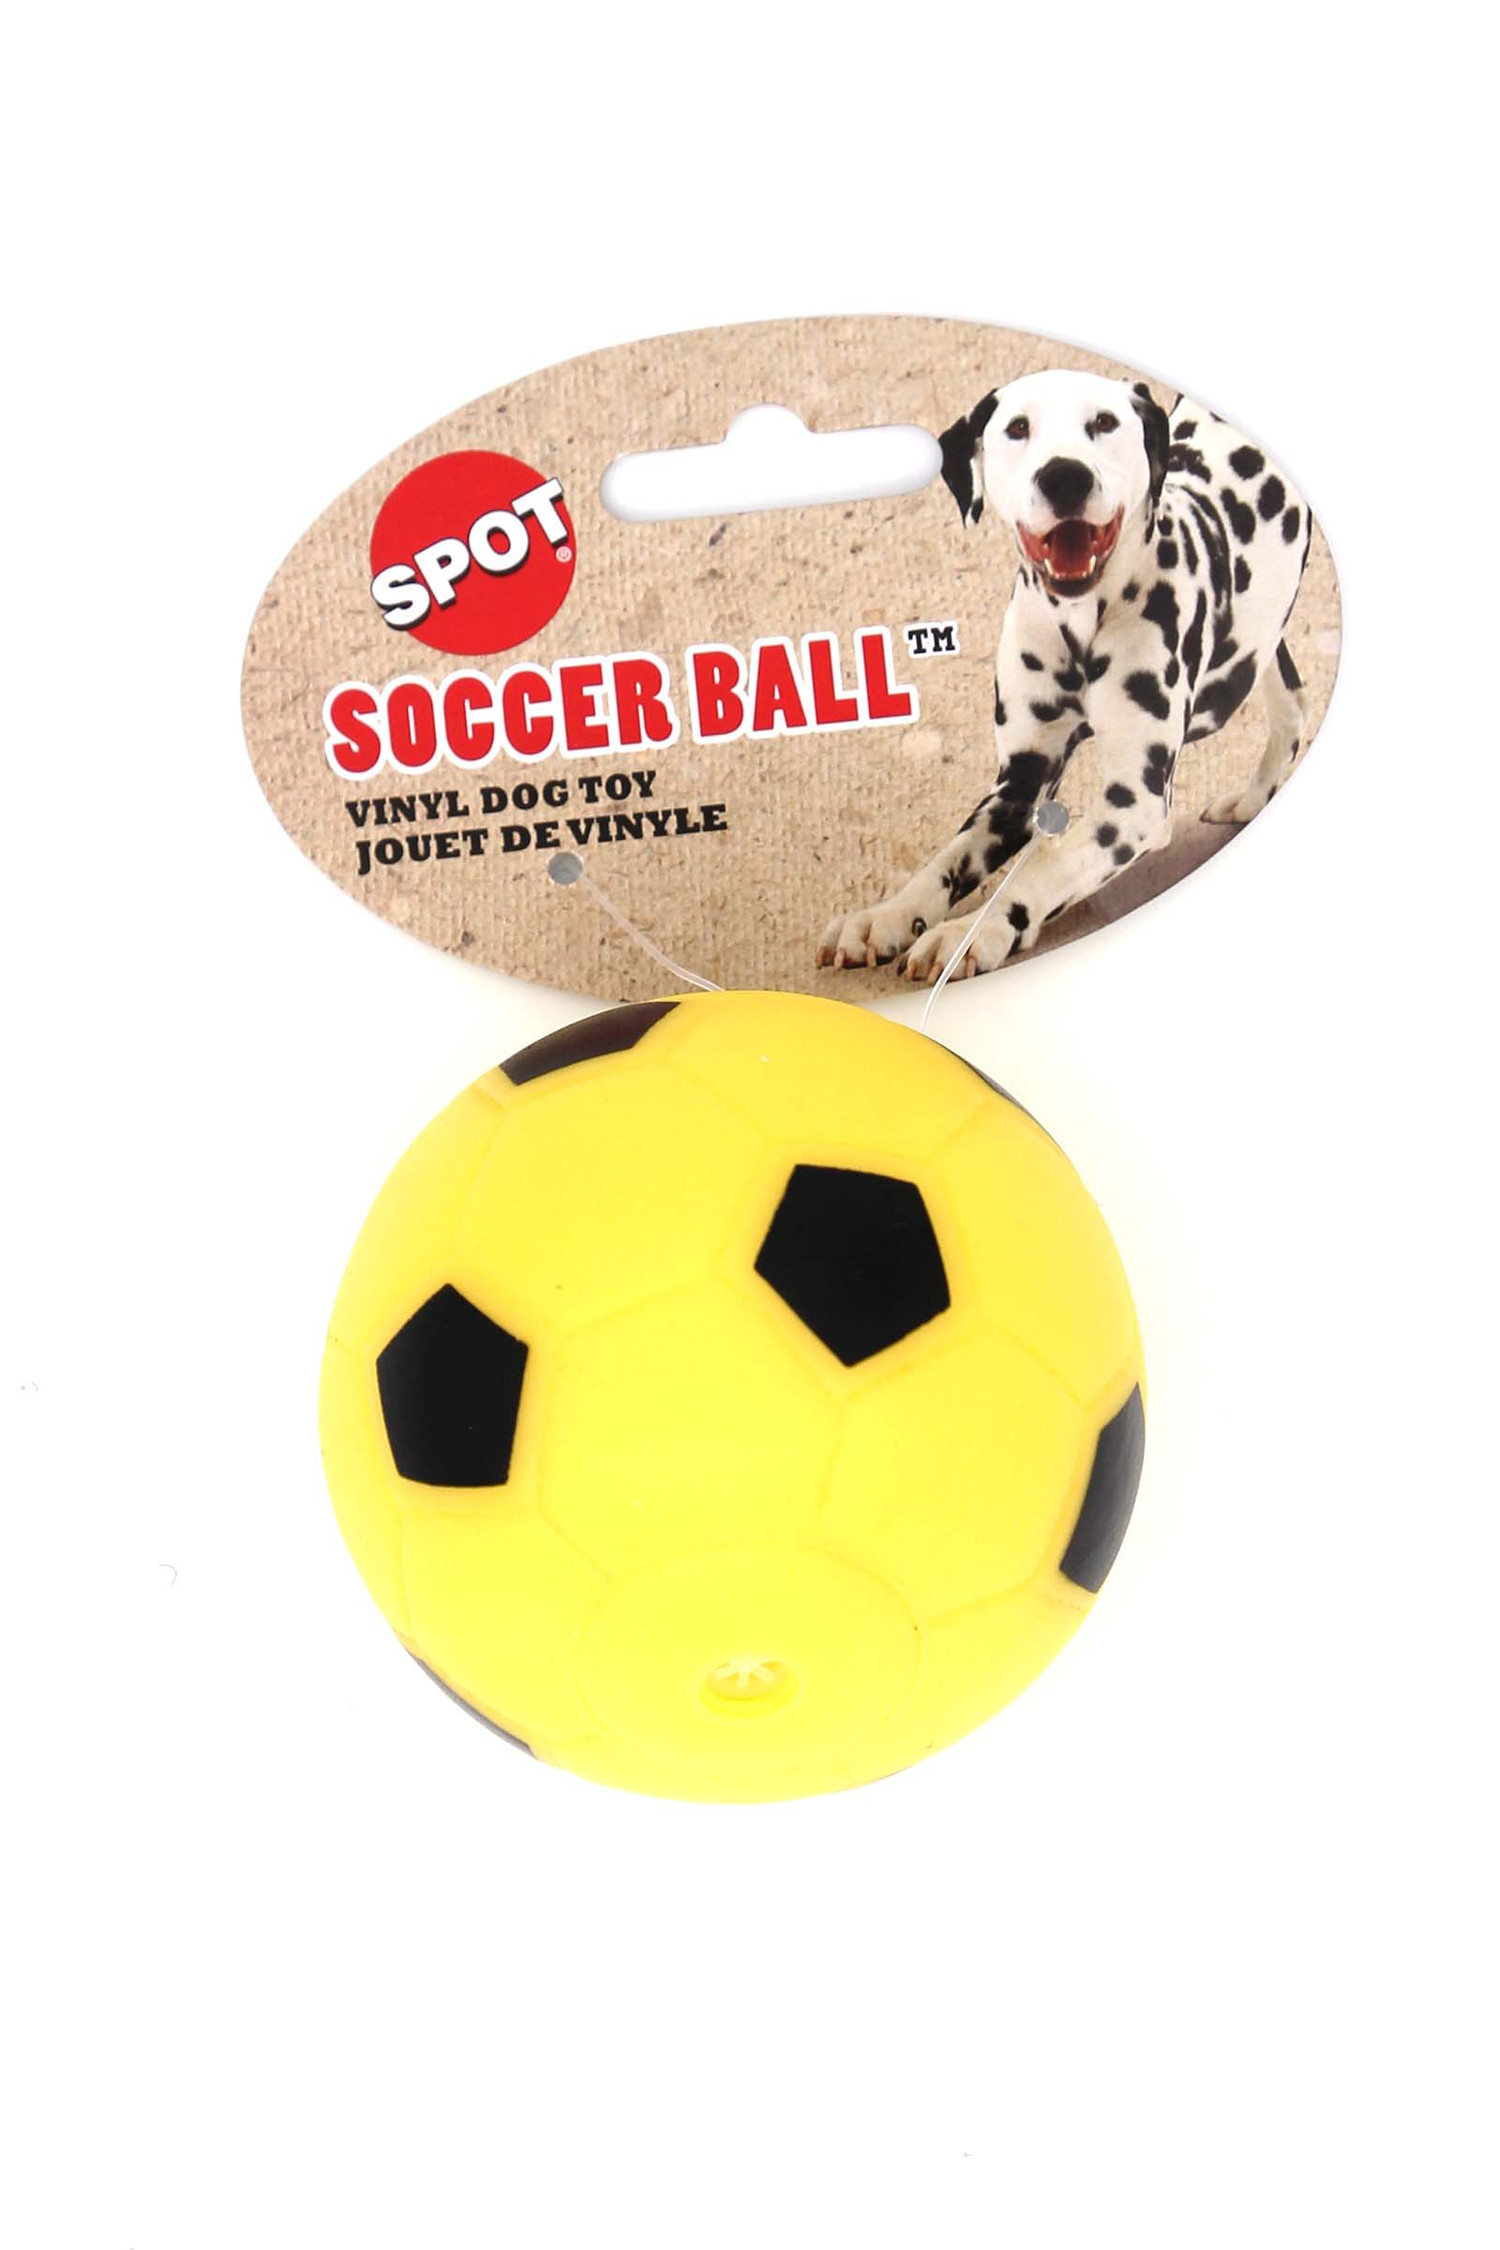 Spot Vinyl Soccer Ball Squeaky Dog Toy - Assorted Colors